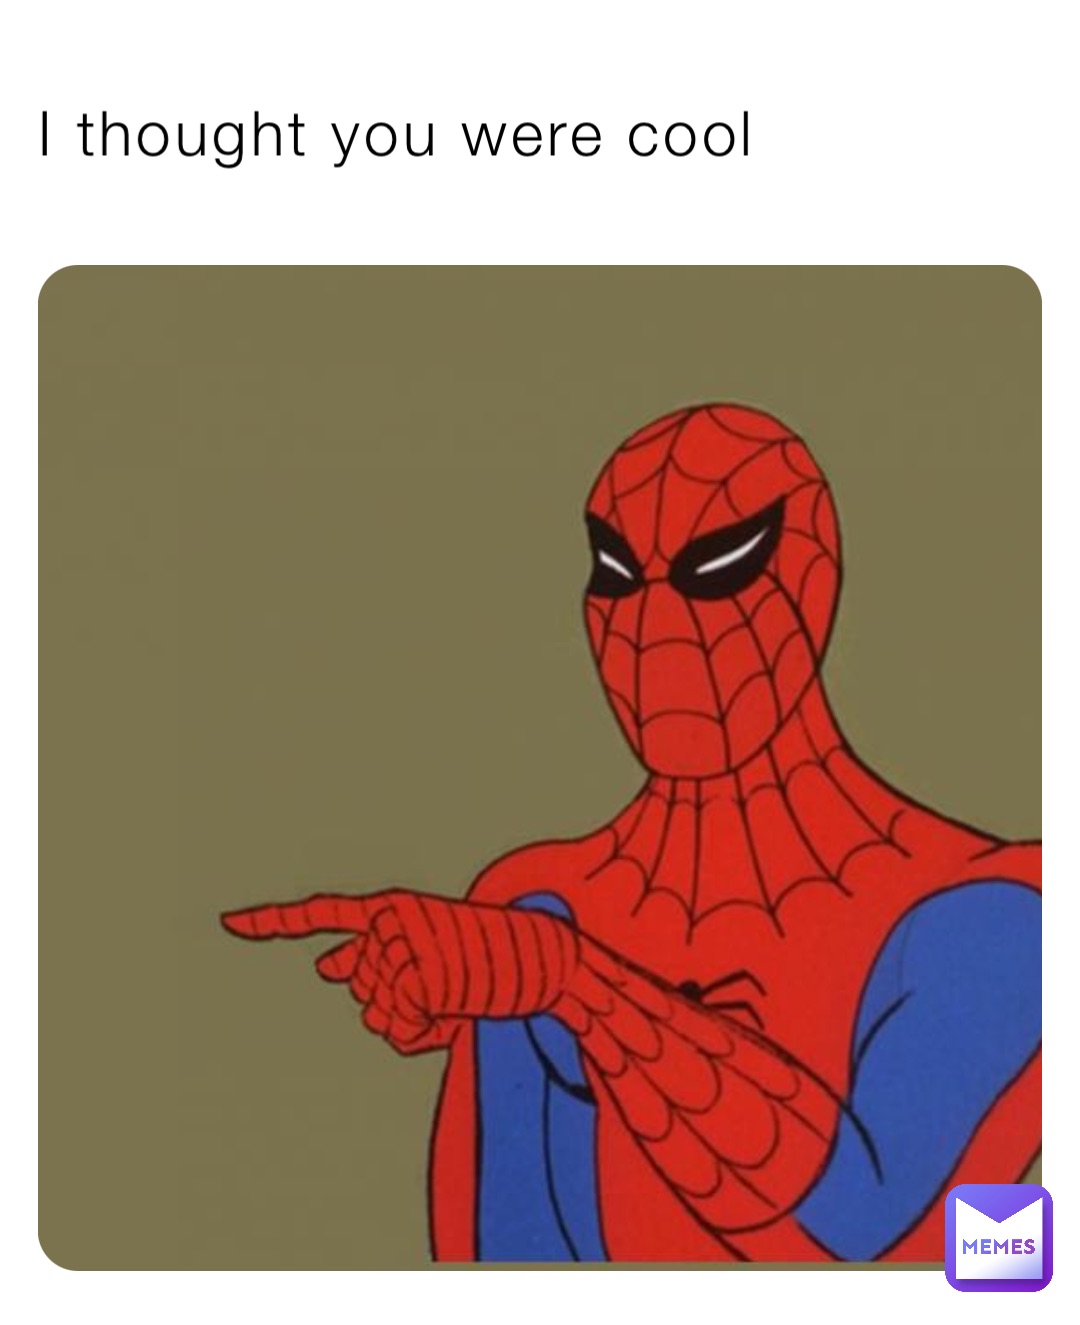 I thought you were cool